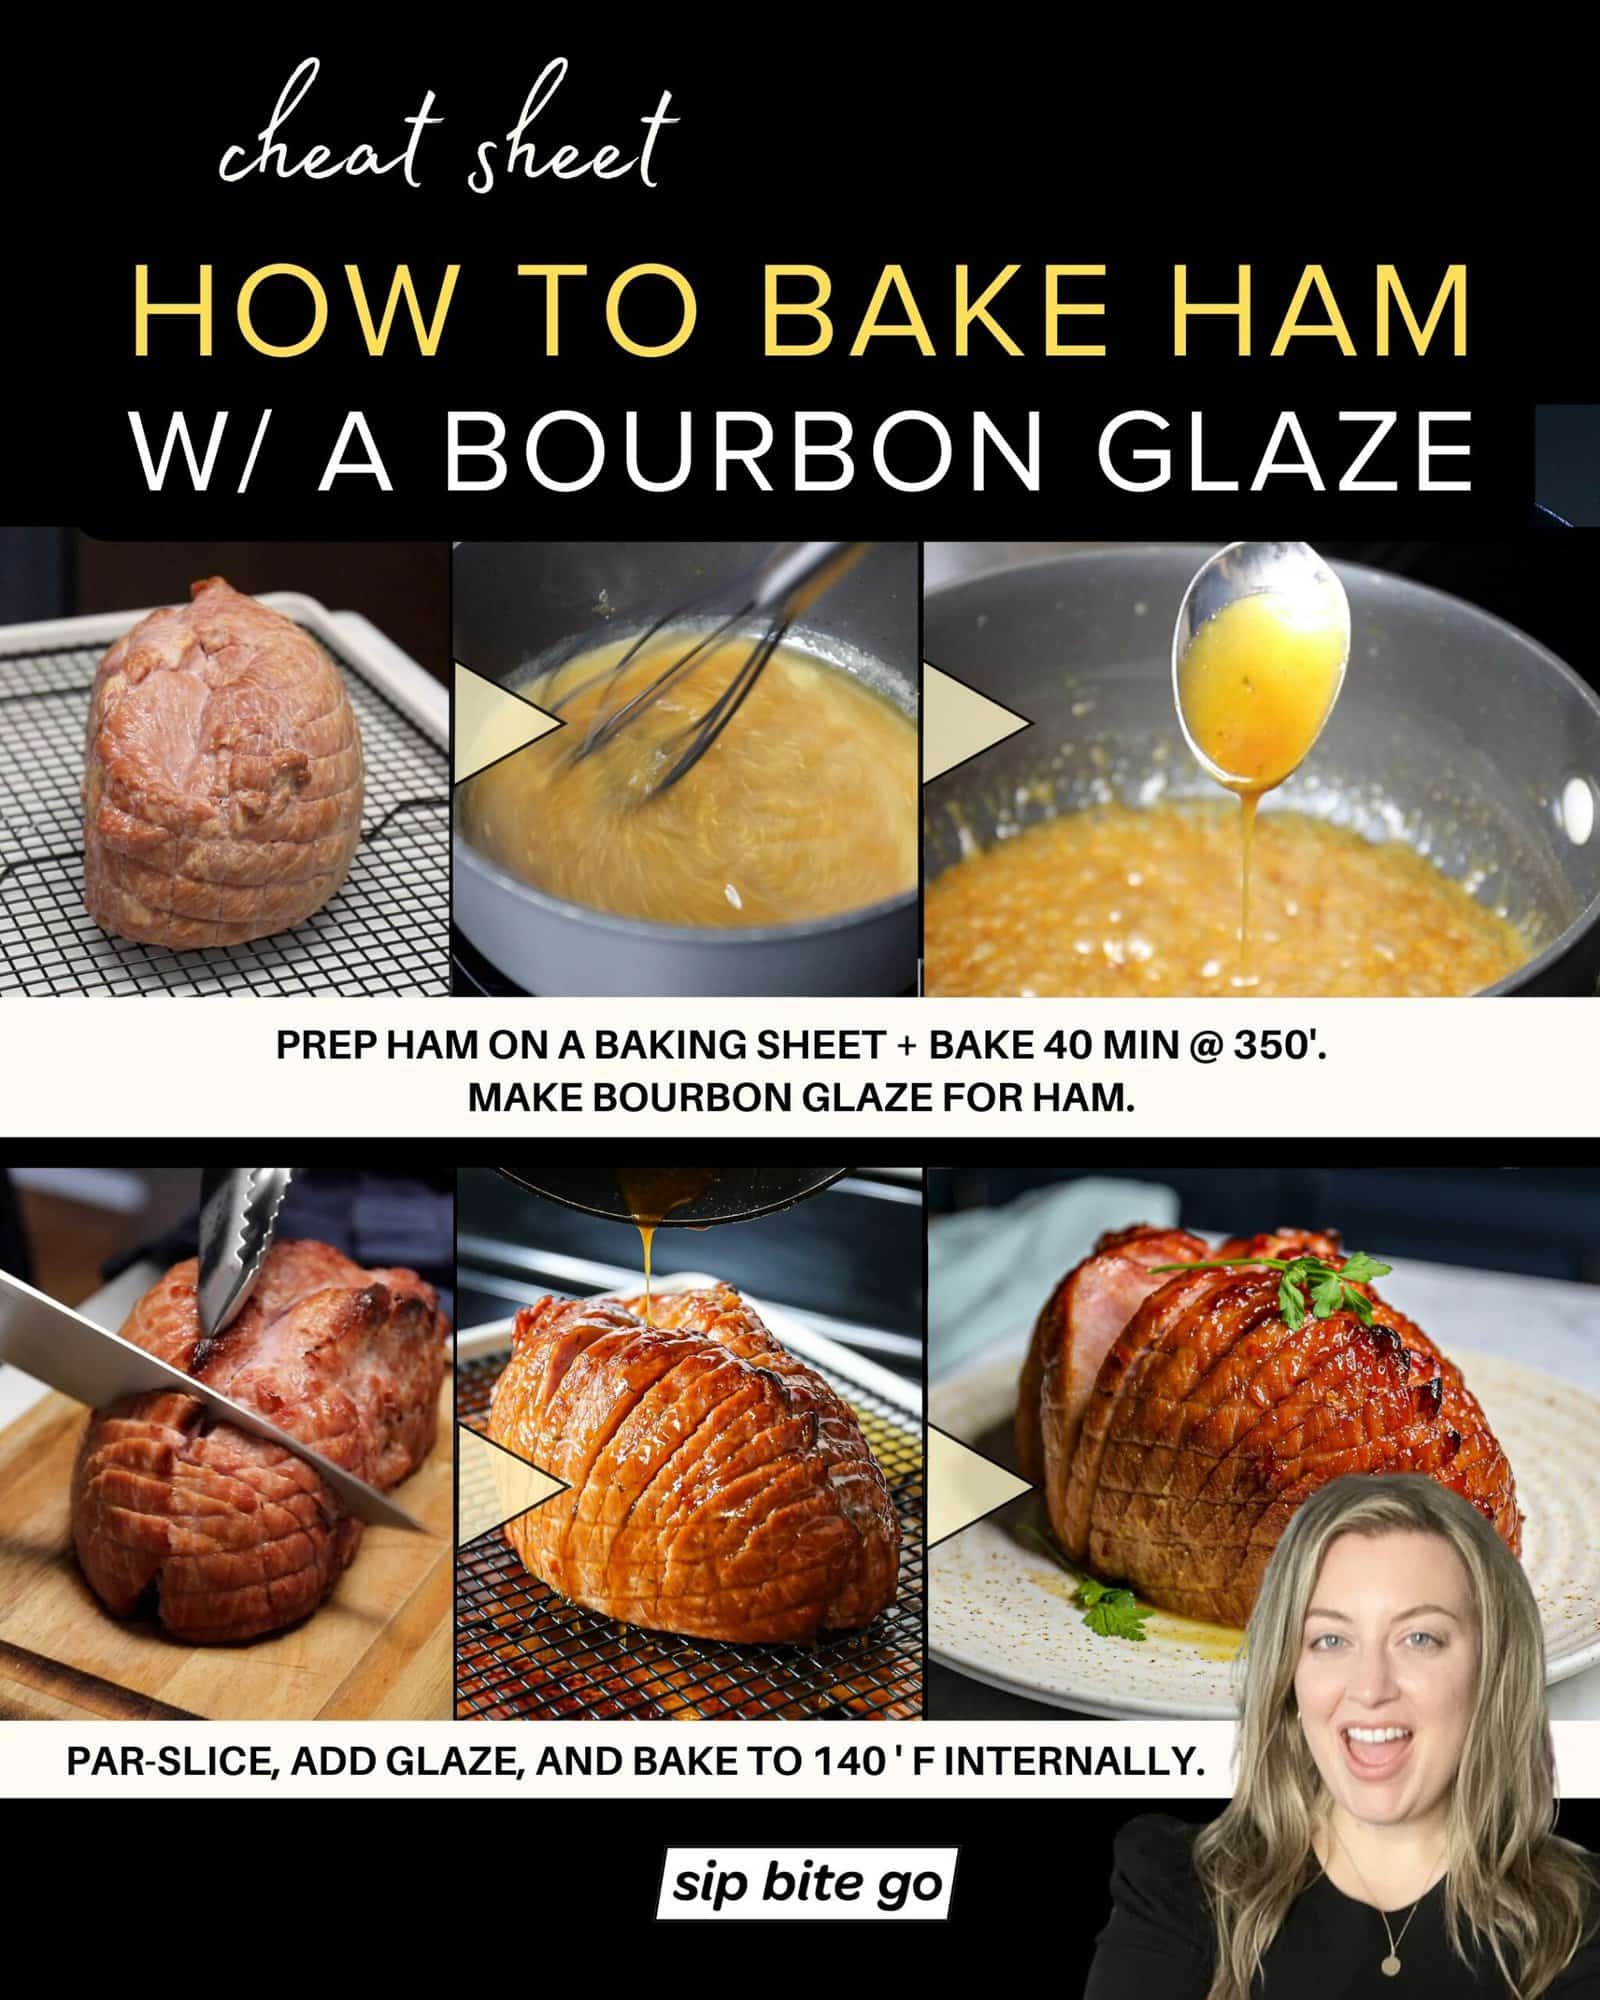 Infographic with recipe steps and captions for baking ham in the oven with a bourbon glaze